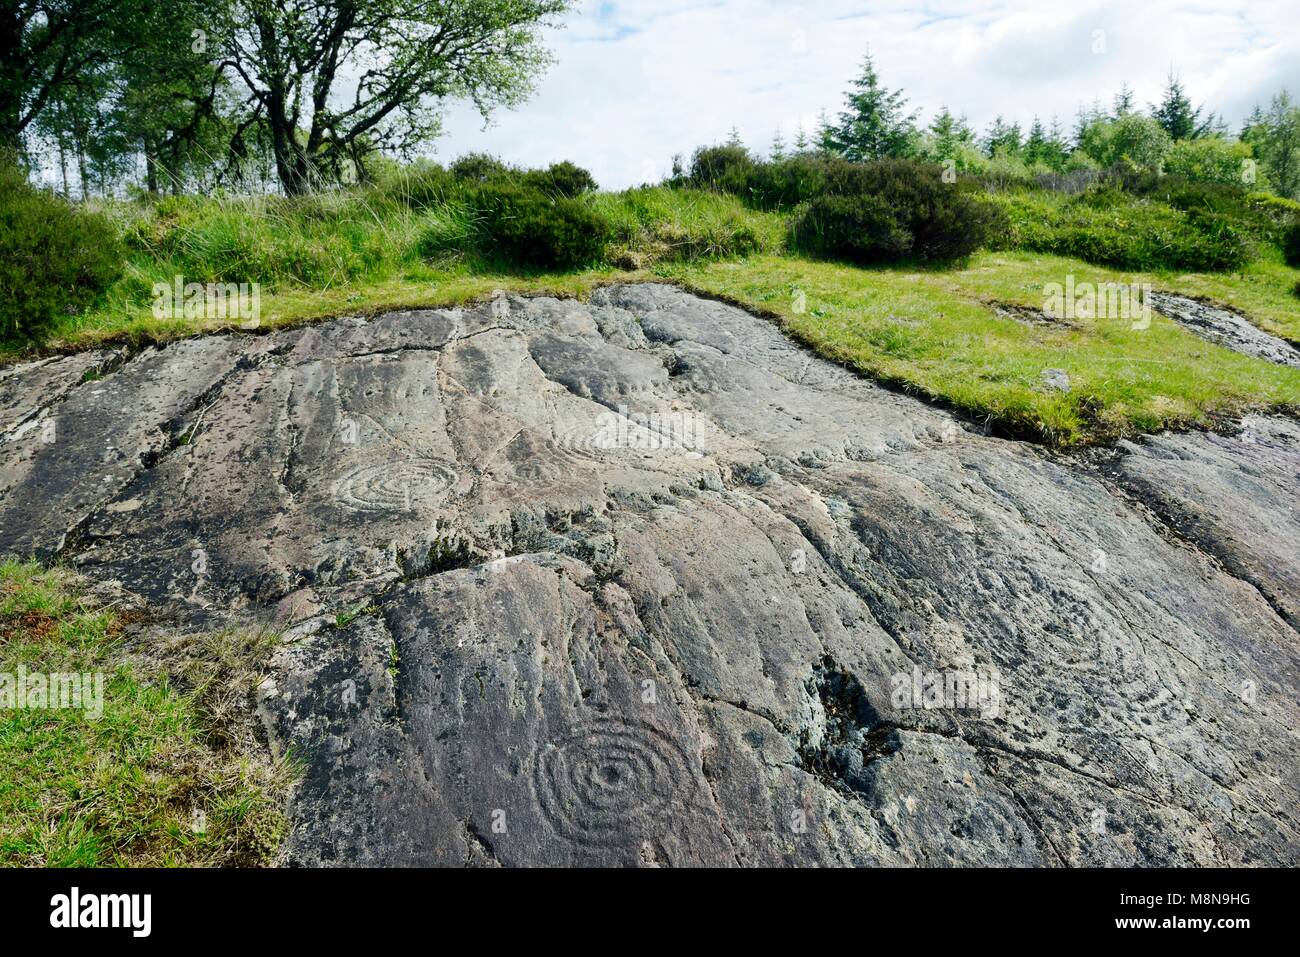 Cup and ring mark marks prehistoric Neolithic rock art on natural rock outcrop at Achnabreck in Kilmartin Valley, Argyll, Scotland, UK Stock Photo